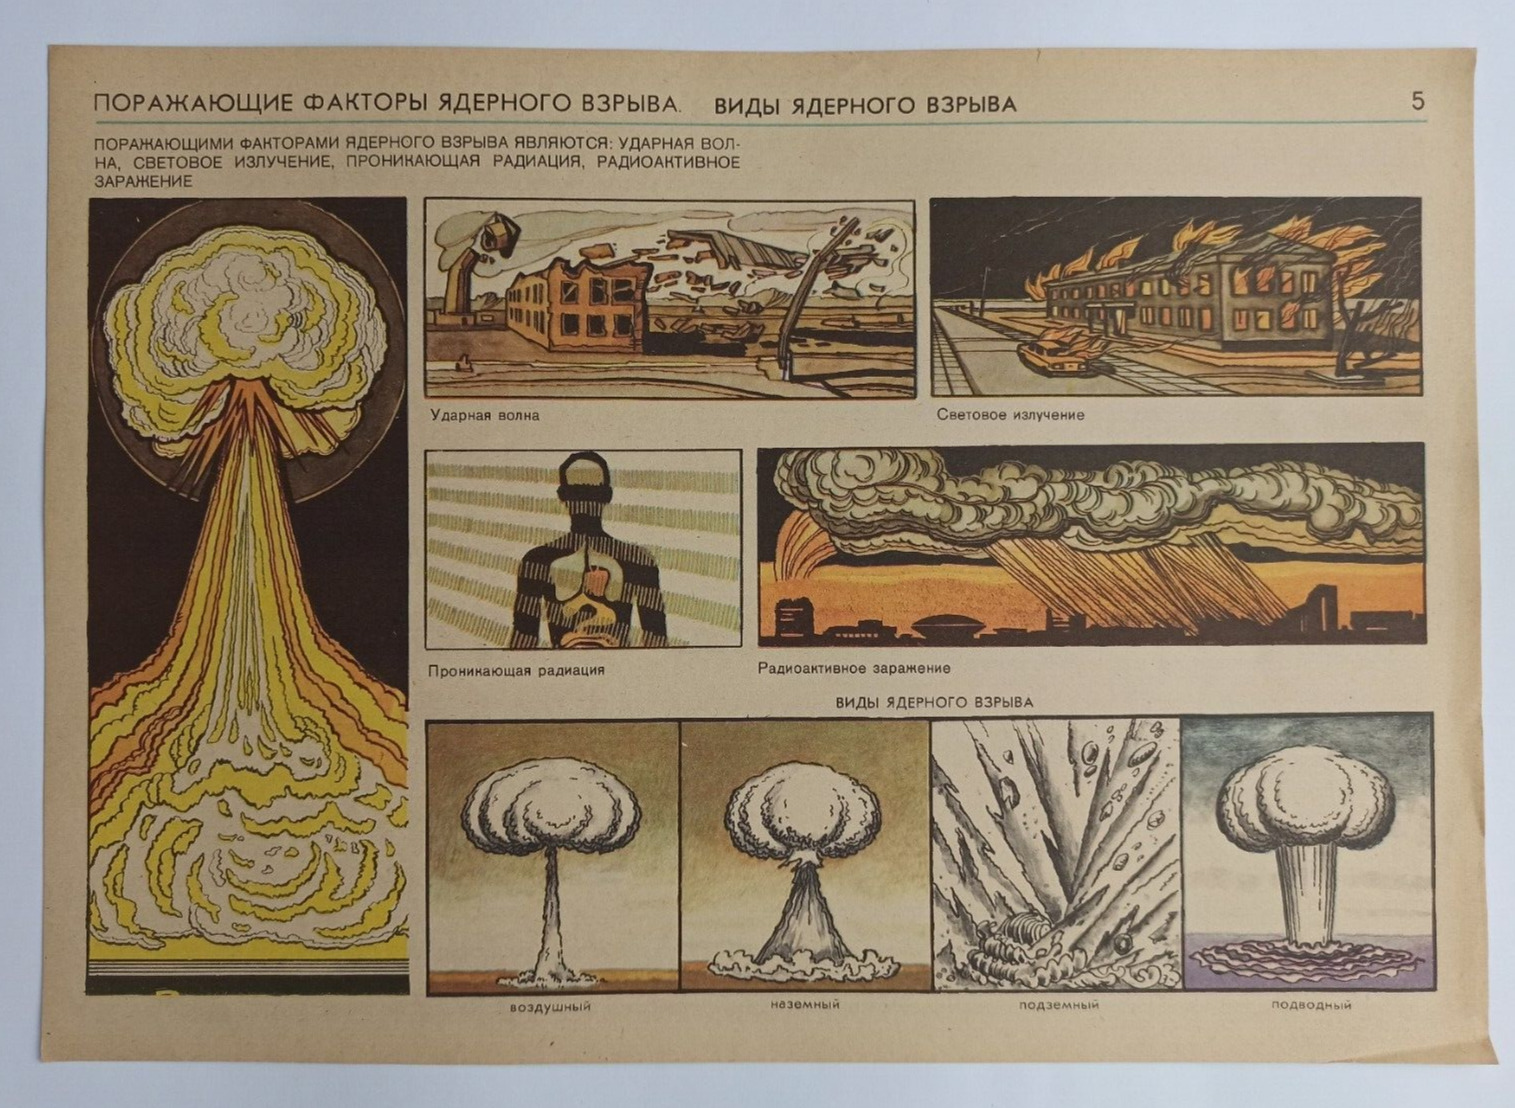 Military Poster, Nuclear War, Radiation protection, Soviet Poster, Vintage 5